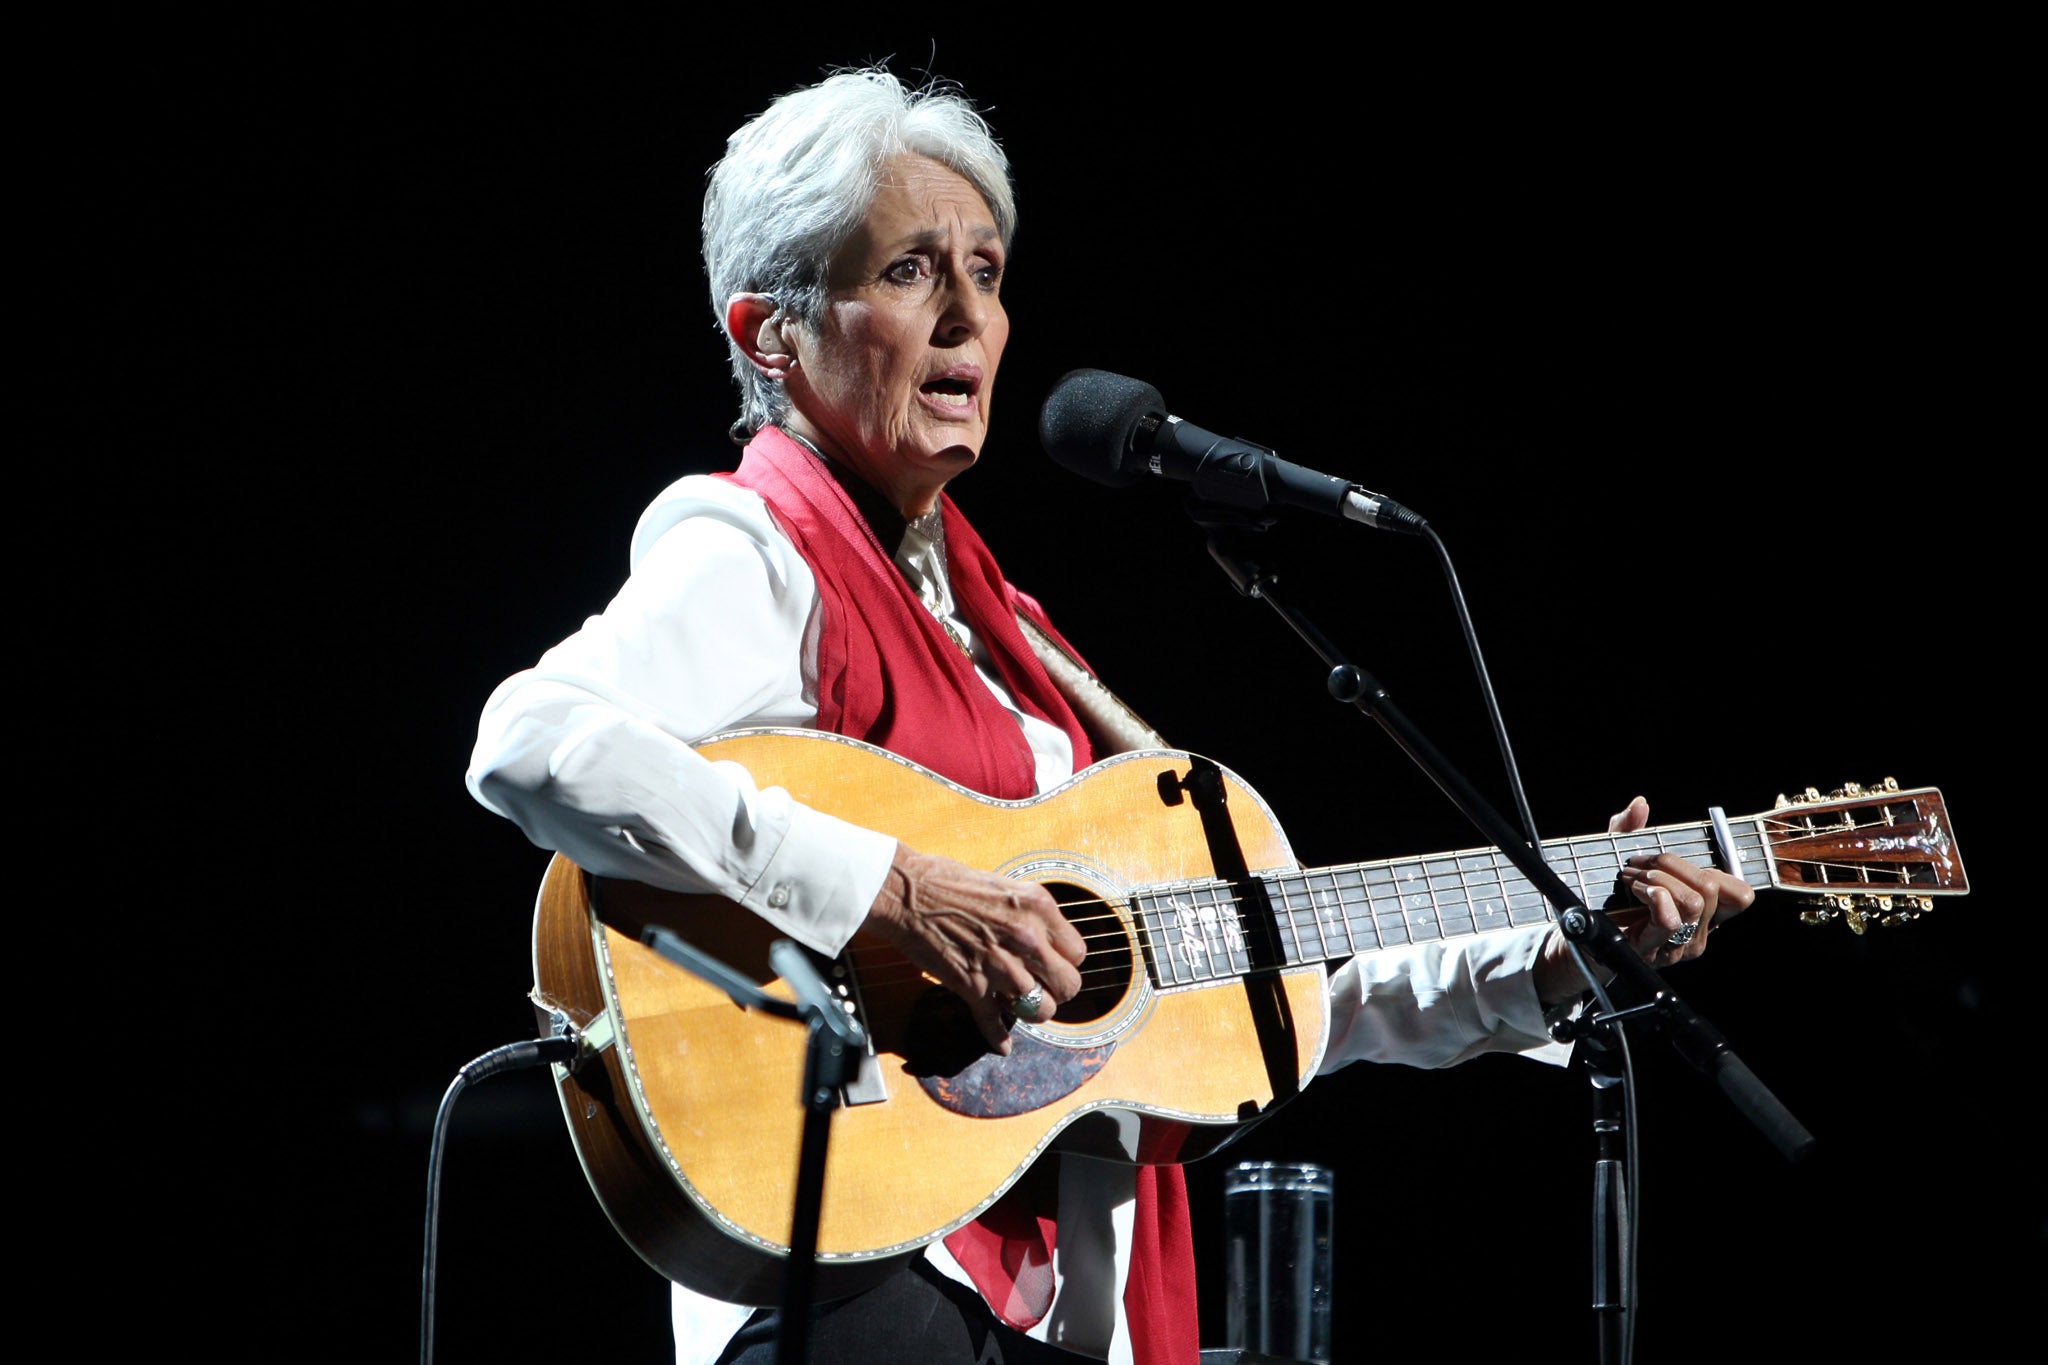 Joan Baez performs on stage at London's Southbank Centre